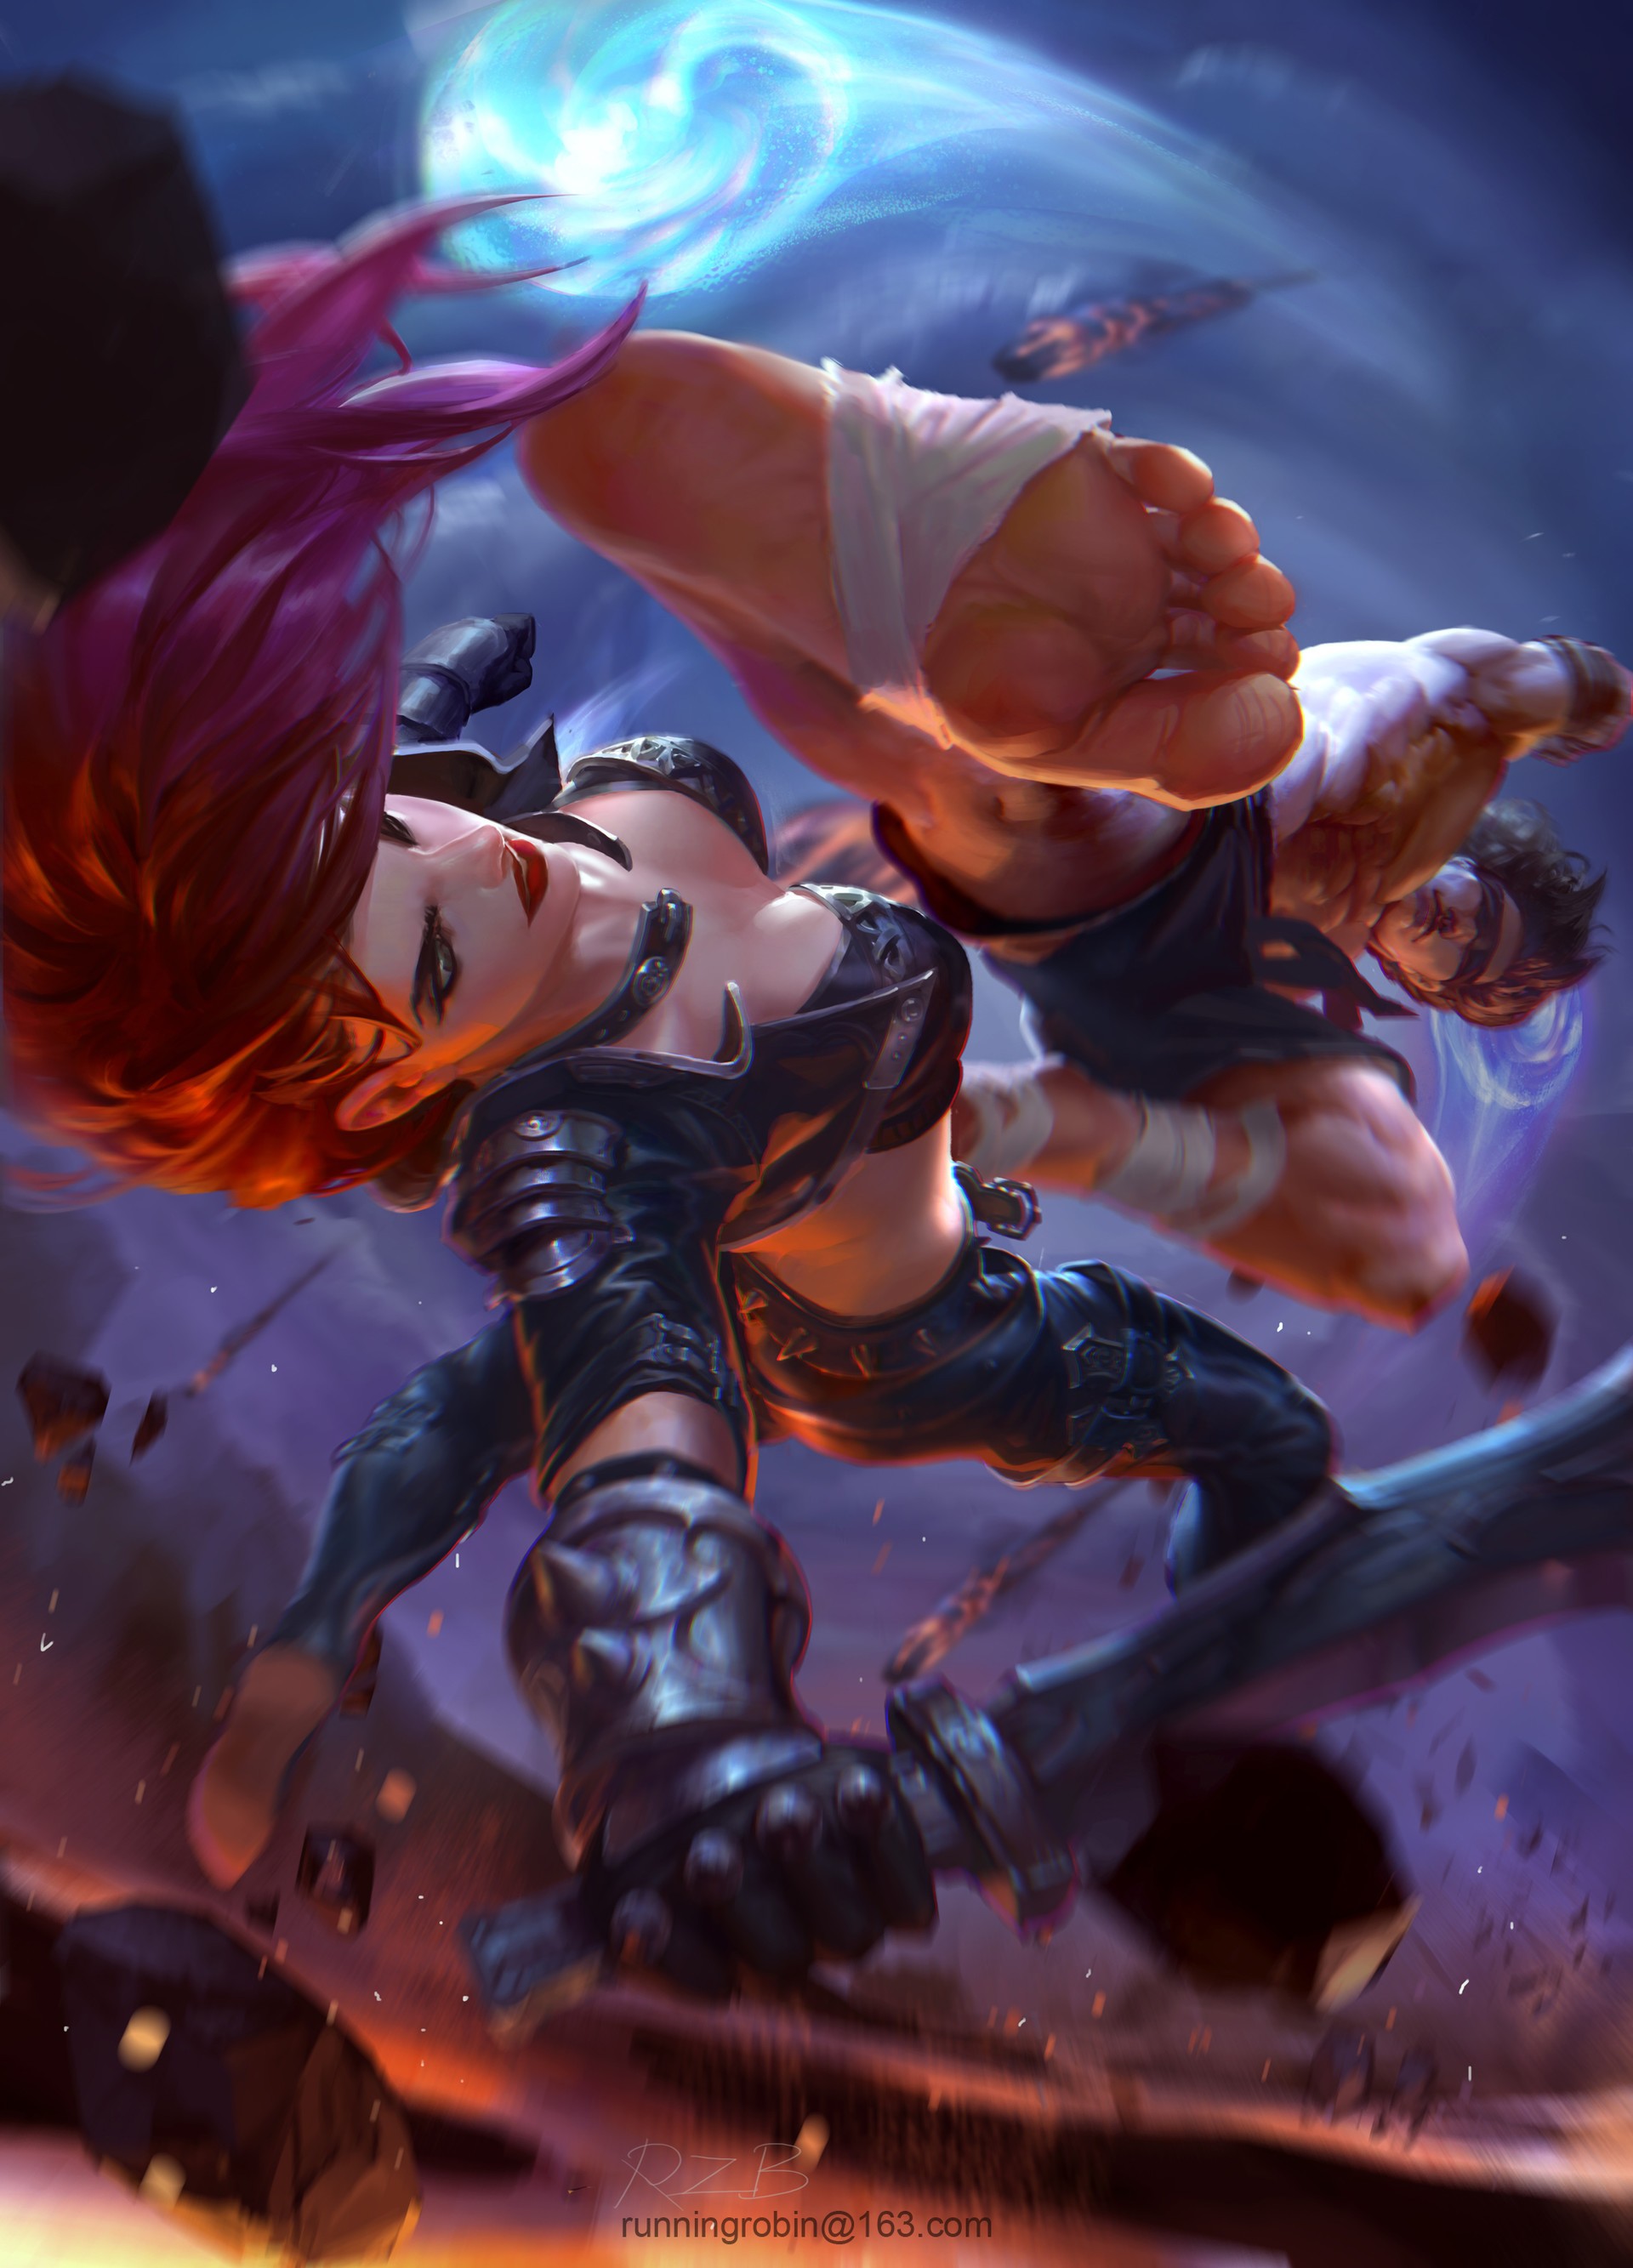 General 1920x2667 fantasy art League of Legends Lee Sin (League of Legends) Katarina (League of Legends) PC gaming boobs feet red lipstick video game girls video game men video game art